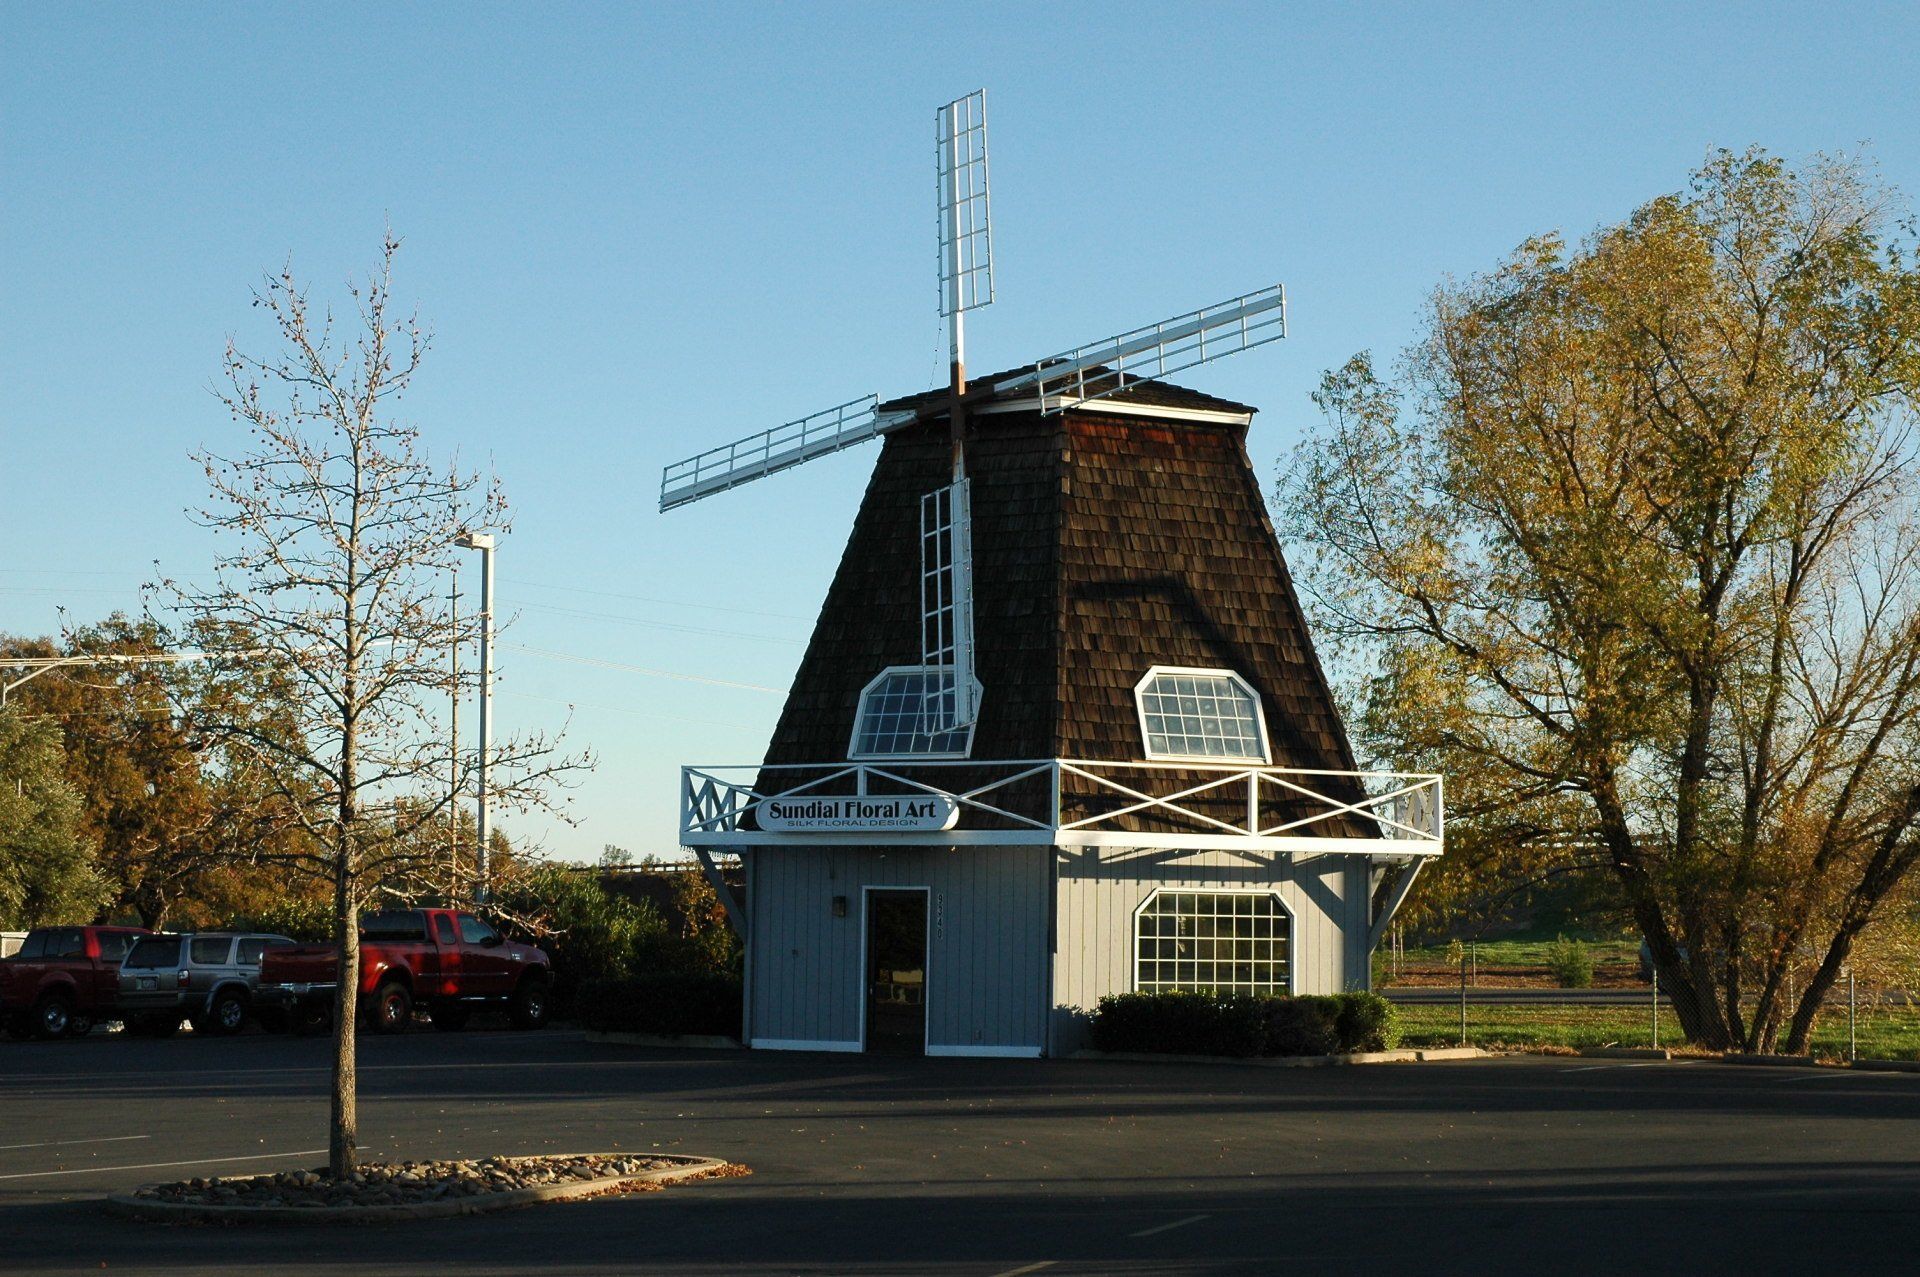 Palo Cedro, CA - Rustic windmill-shaped building houses Sentinel Federal Credit Union in parking lot under clear blue sky.